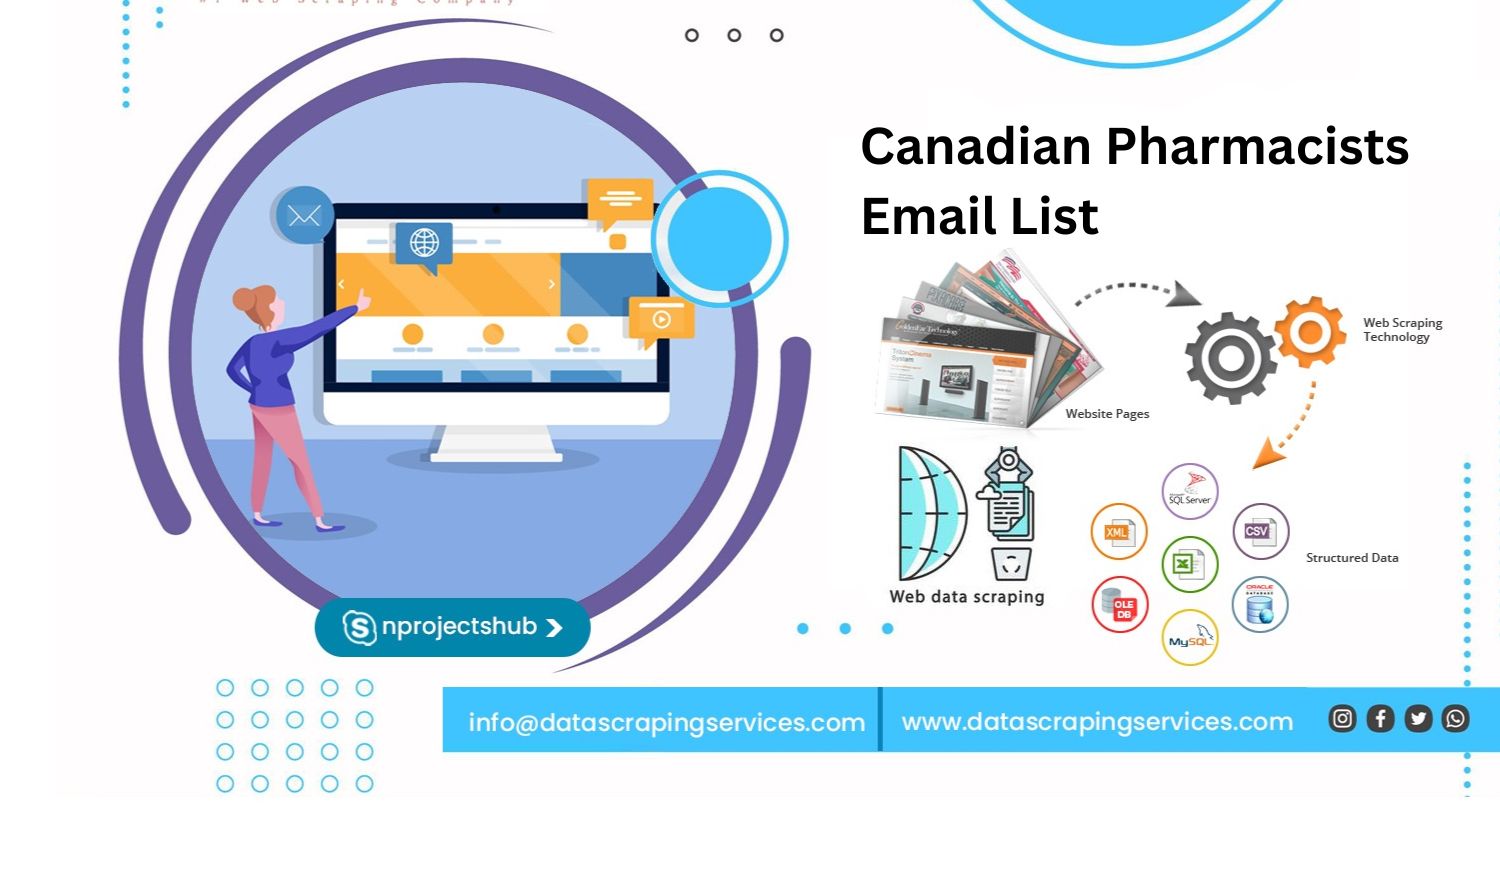 Canadian Pharmacists Email List